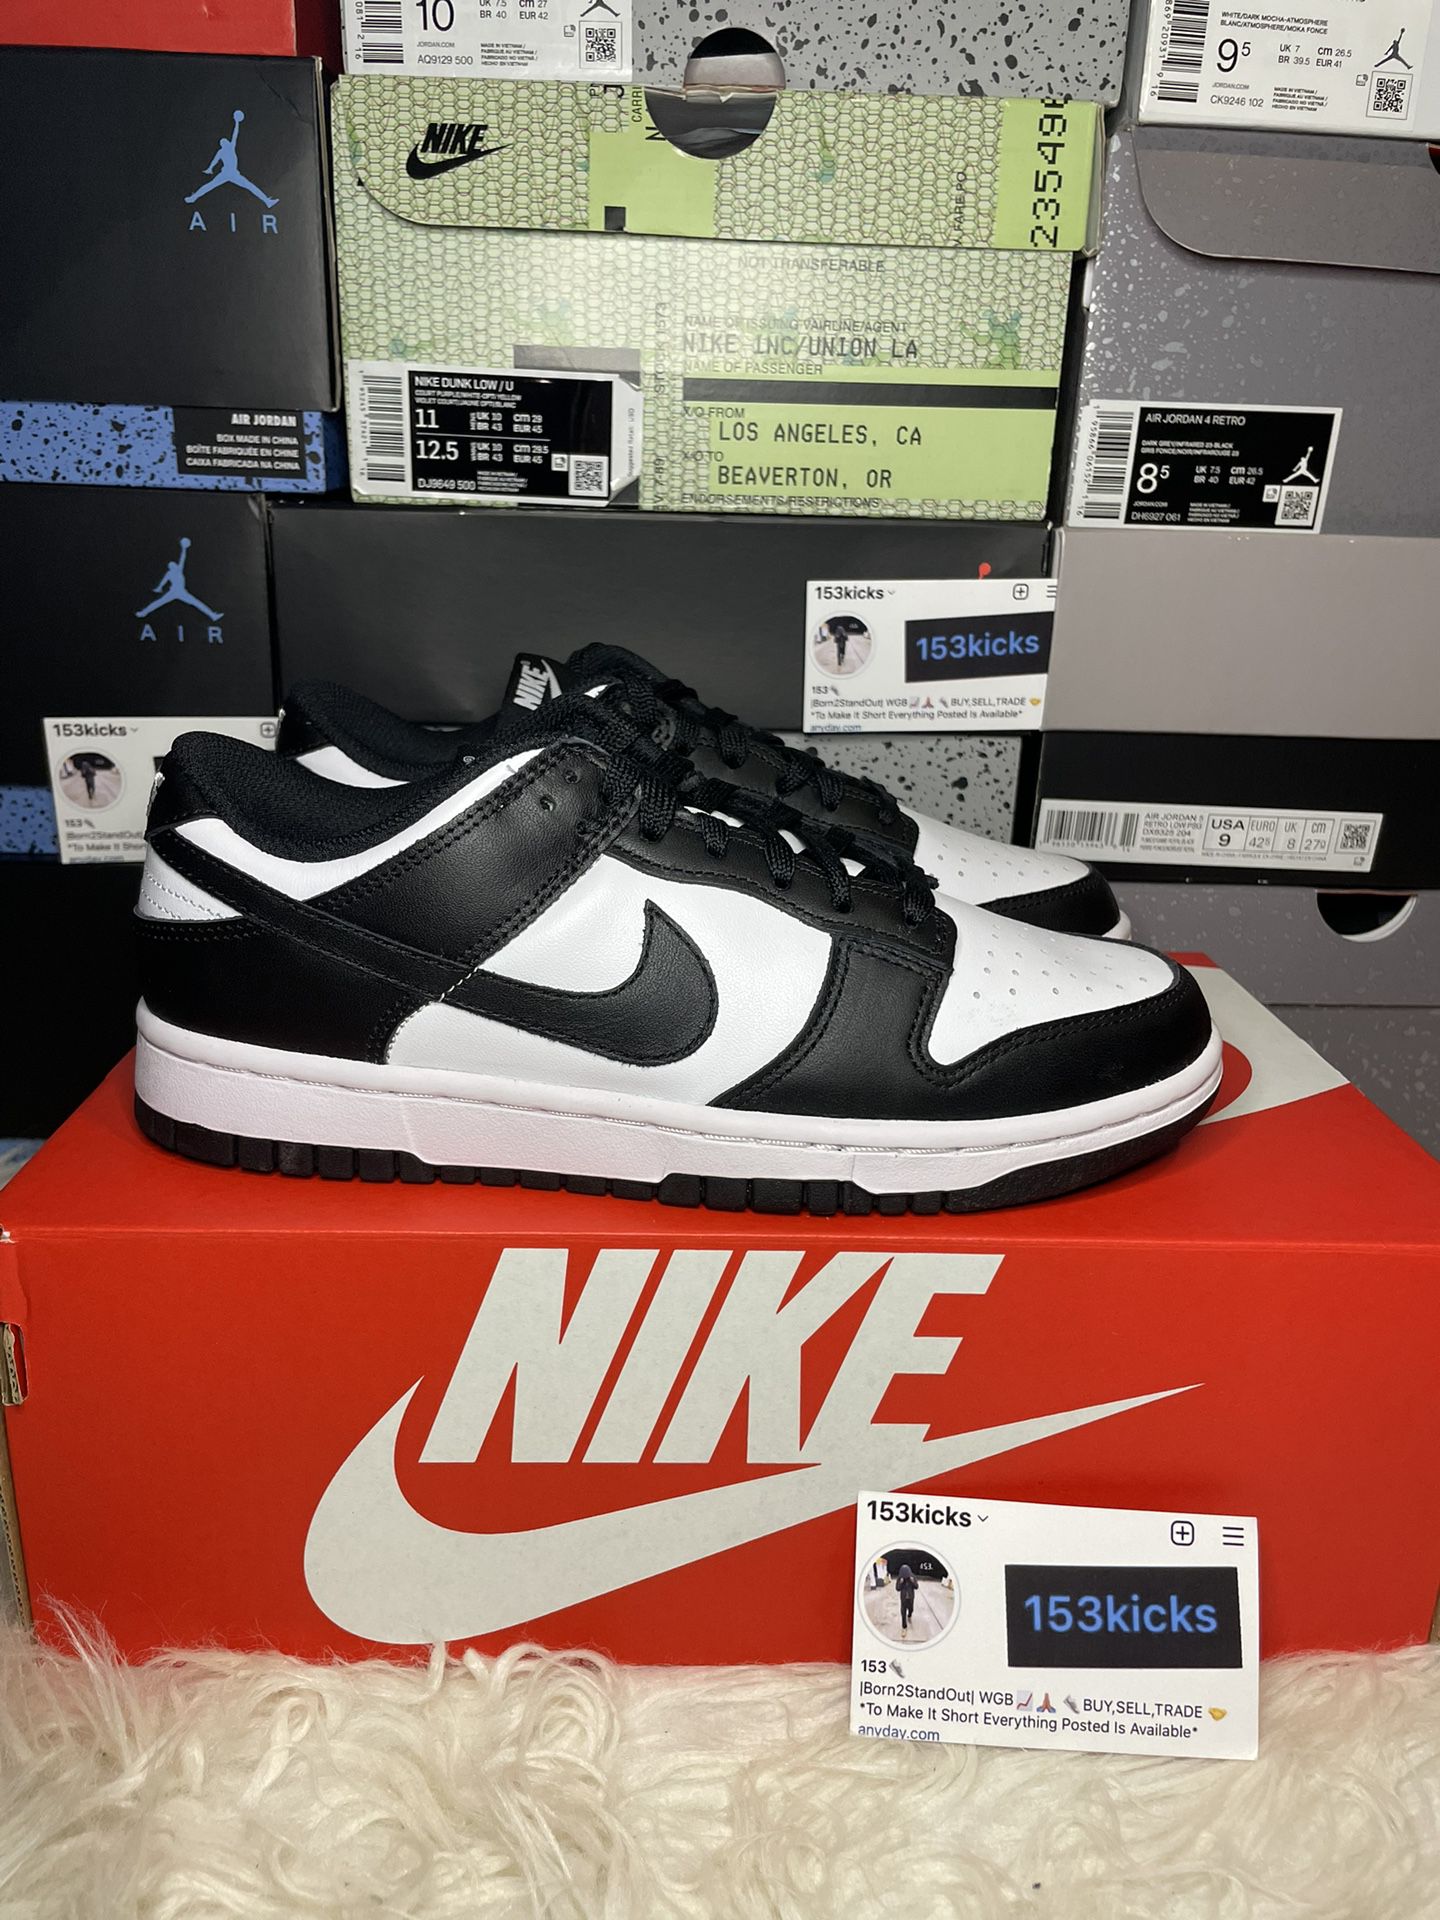 Nike Retro Dunk Pandas Size 7.5 Womens 6 Youth Asking 180$ Brand New 100% Authentic OG All for Sale in Everett, WA - OfferUp